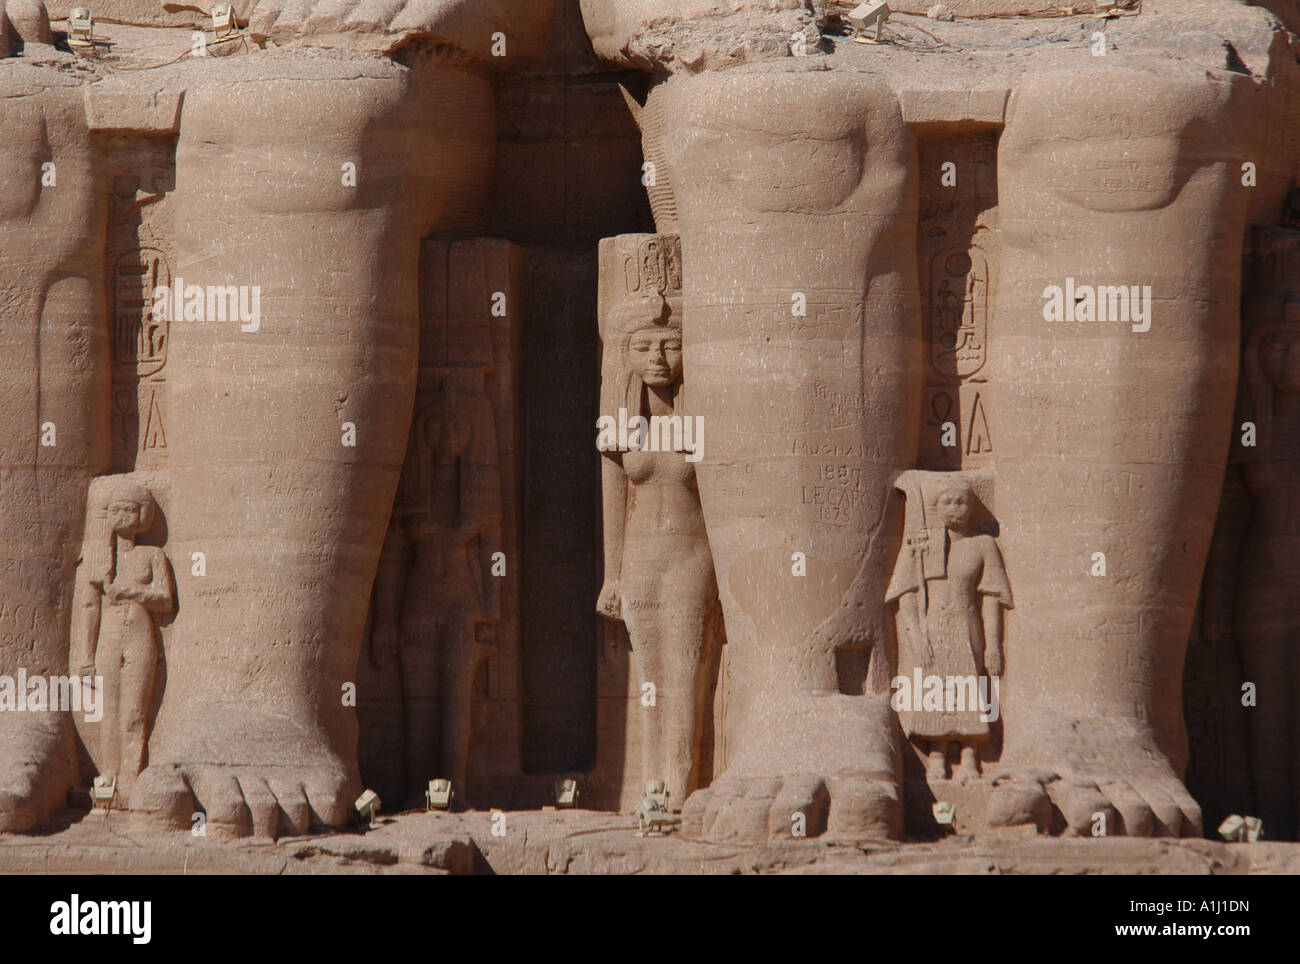 Huge legs of the colossi of pharaoh Ramesses II in front of the Sun Temple of Abu Simbel near Aswan, Egypt. Stock Photo